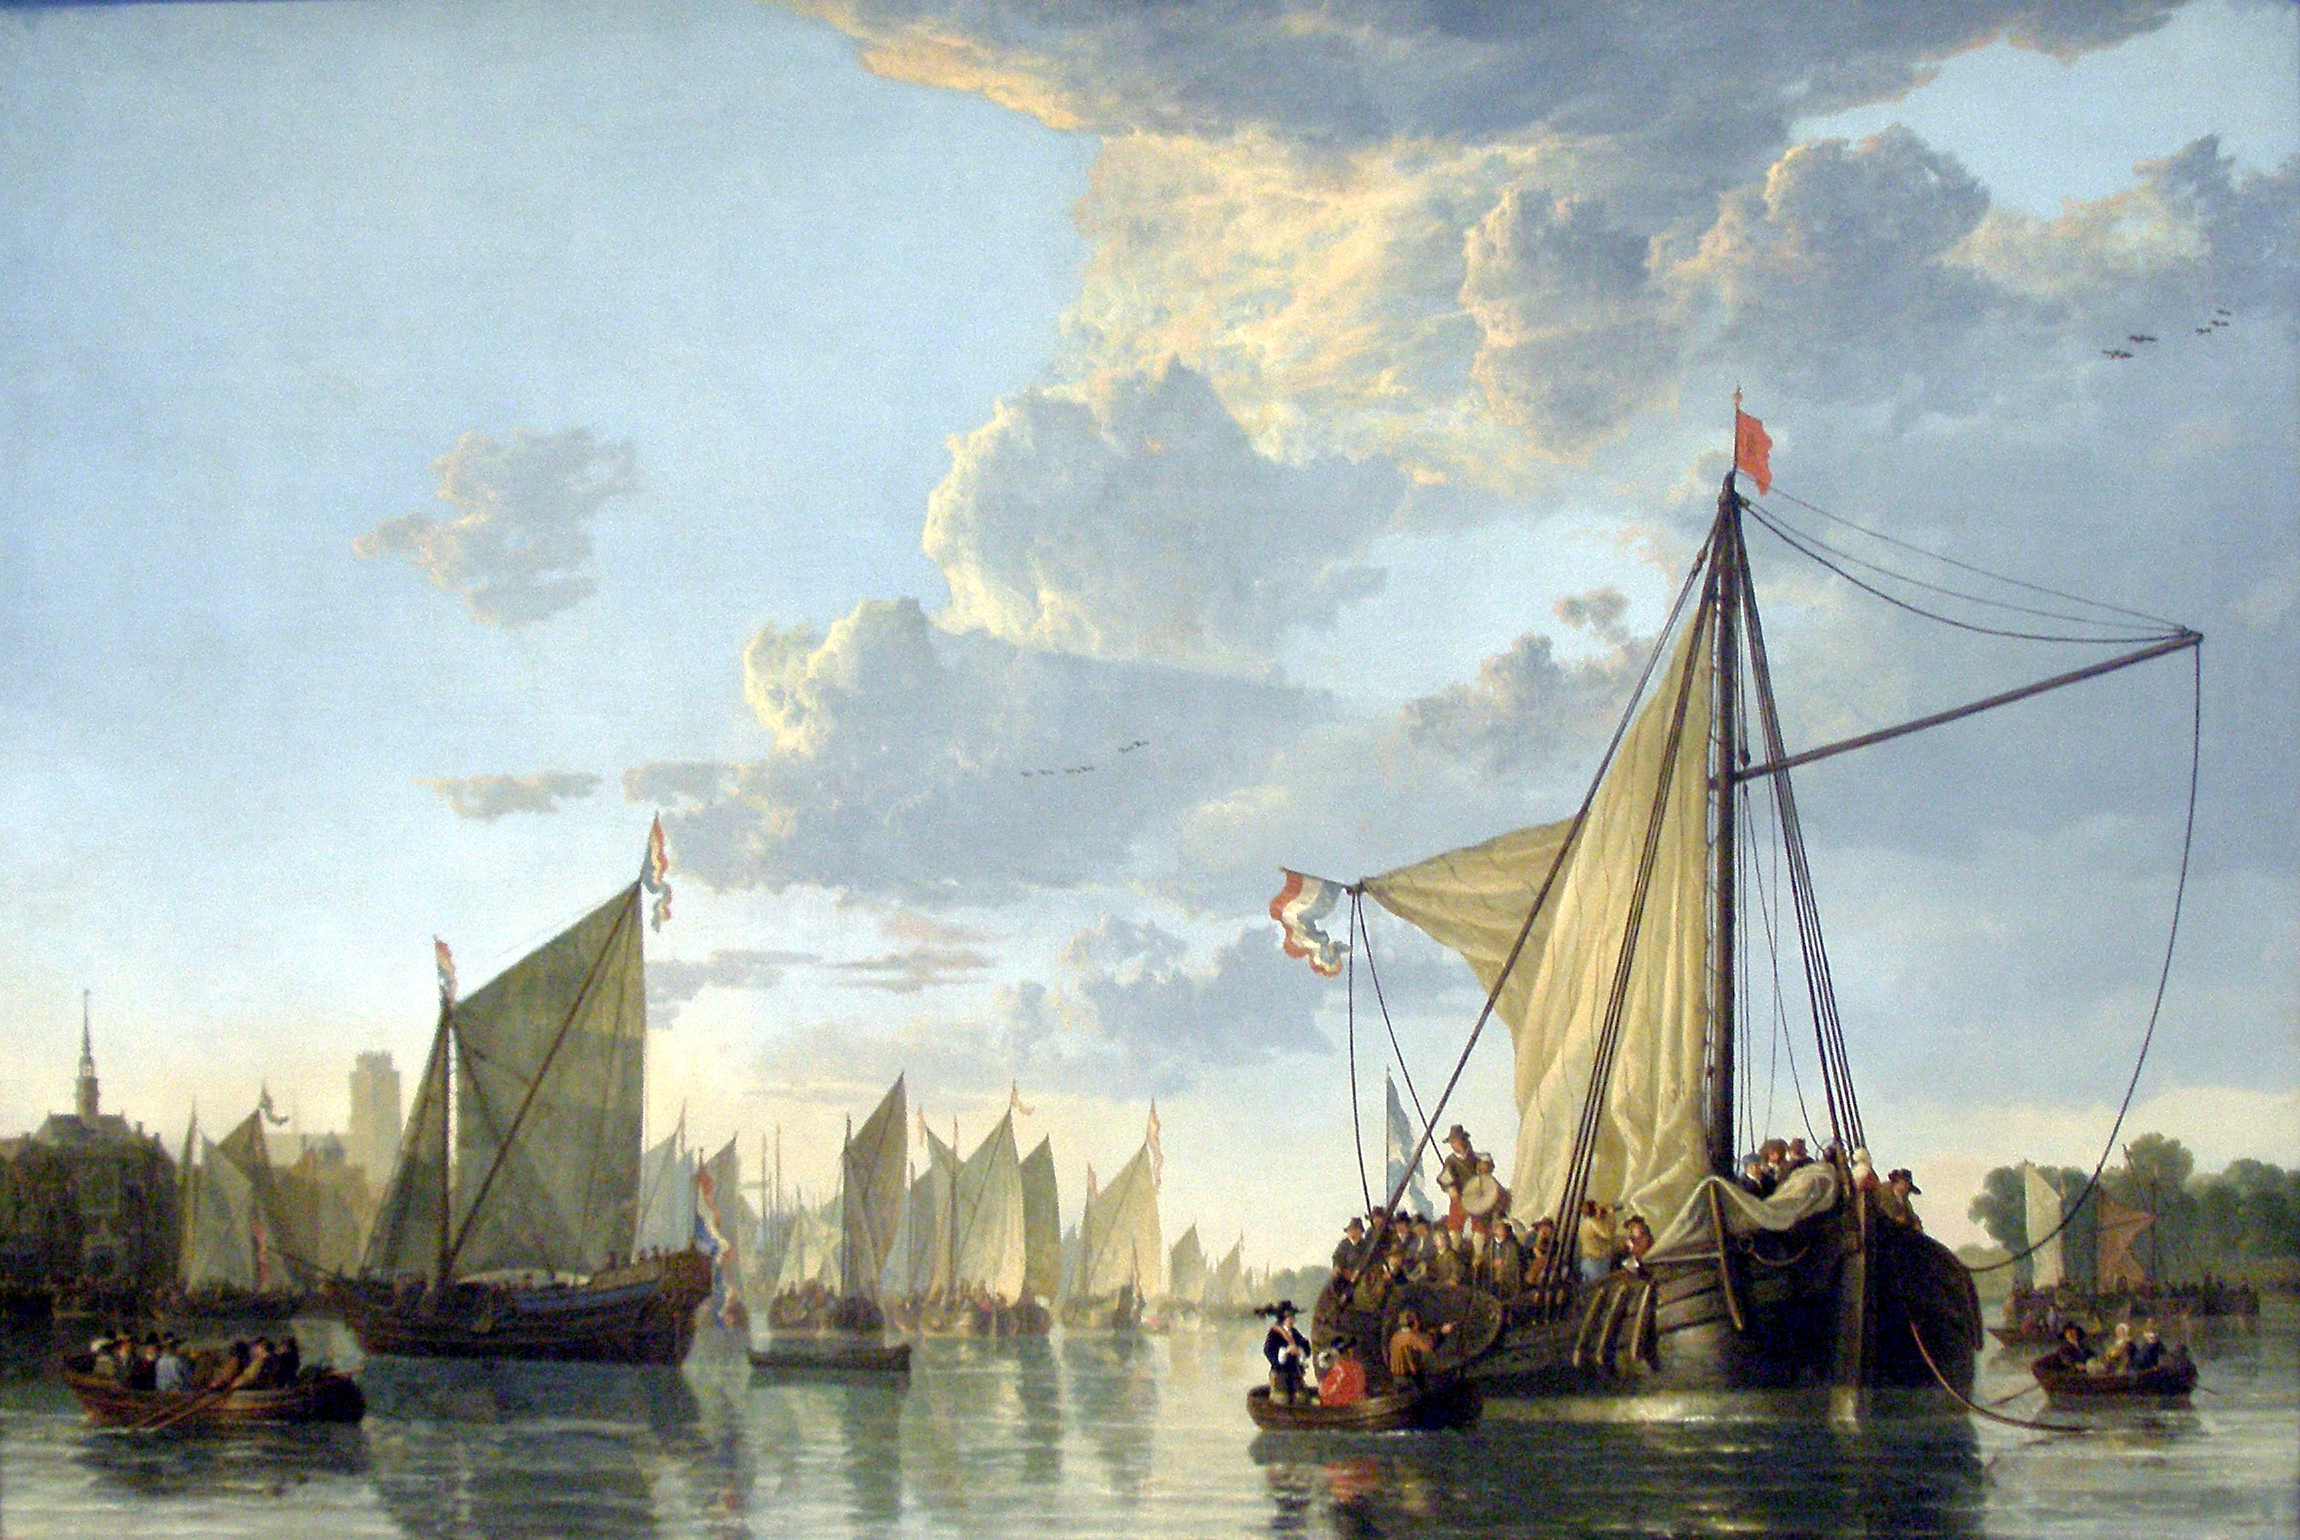 The Maas at Dordrecht by Aelbert Cuyp - c.1650 -  114.9 x 170.2 cm National Gallery of Art